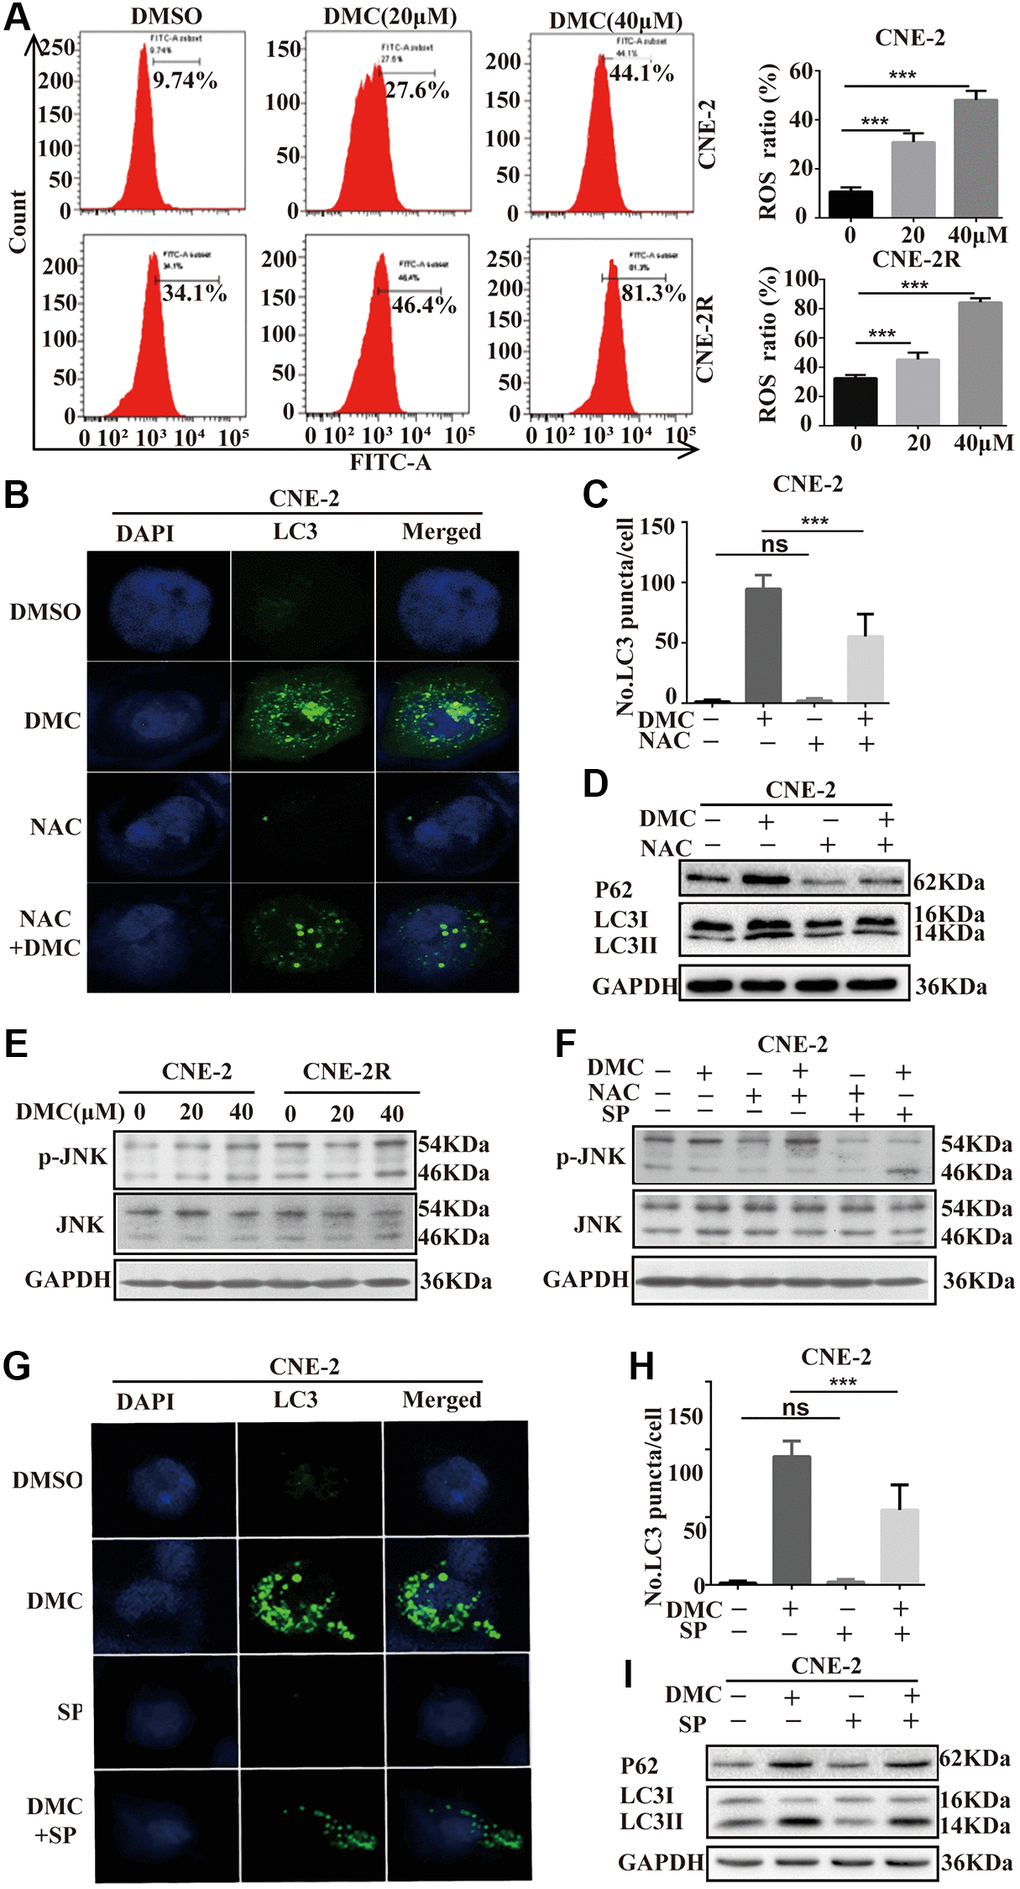 DMC-induced autophagy is mediated through activating ROS/JNK axis in NPC cells. (A) CNE-2 and CNE-2R cells were treated with 20, 40 μM DMC or 0.1% DMSO for 24 h, and then the ROS level was measured and analyzed by flow cytometry. Statistical analysis histogram of the ROS positive percentage. (B, C) Representative images of LC3-labelled green fluorescence puncta in CNE-2 cells after NAC (5 mM) pretreatment for 4 h. Scale bar: 10 μm. Nuclei were stained with DAPI. Histogram of LC3-labelled green fluorescence puncta per cell and over 30 cells were counted in each group. (D) Western blotting analysis of LC3-I, LC3-II and P62 levels in CNE-2 cells as Figure 4B, GAPDH was used as a loading control. (E) Western blotting analysis of of p-JNK and JNK protein expressions in CNE-2 and CNE-2R cells treated with 20, 40 μM DMC or 0.1% DMSO for 24 h. (F) Western blotting analysis of of p-JNK and JNK protein expressions in CNE-2 cells treated with 0.1% DMSO or 20 μM DMC for 24 h in the absence or presence of NAC (5 mM) pretreatment for 4 h and SP600125 (30 μM) pretreatment for 1 h. (G, H) Representative images of LC3-labelled green fluorescence puncta in CNE-2 cells after SP600125 (30 μM) pretreatment for 1 h. Scale bar: 10 μm. Nuclei were stained with DAPI. Histogram of LC3-labelled green fluorescence puncta per cell and over 30 cells were counted in each group. (I) Western blotting analysis of LC3-I, LC3-II and P62 protein expressions in CNE-2 cells as Figure 4G. **P ***P 